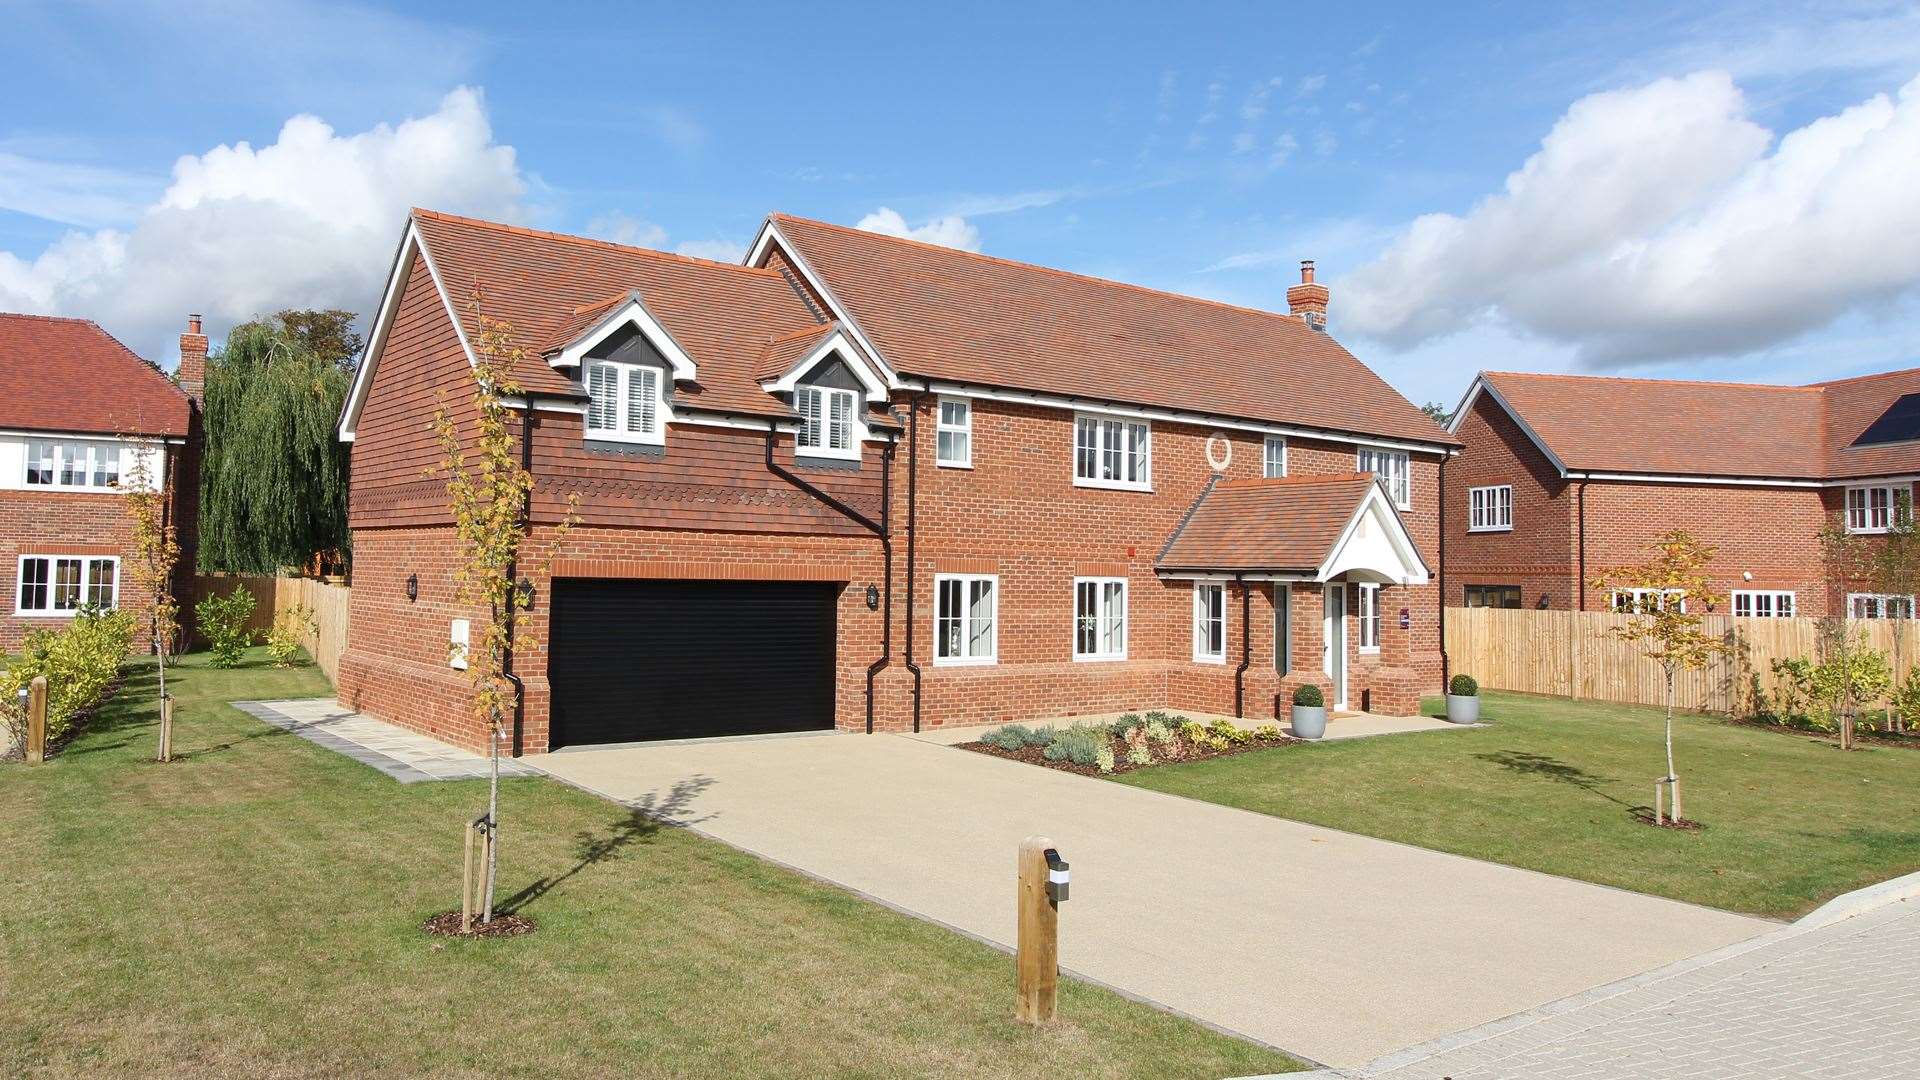 Clarendon Homes' Weavers Park development in Headcorn - a traditional look?